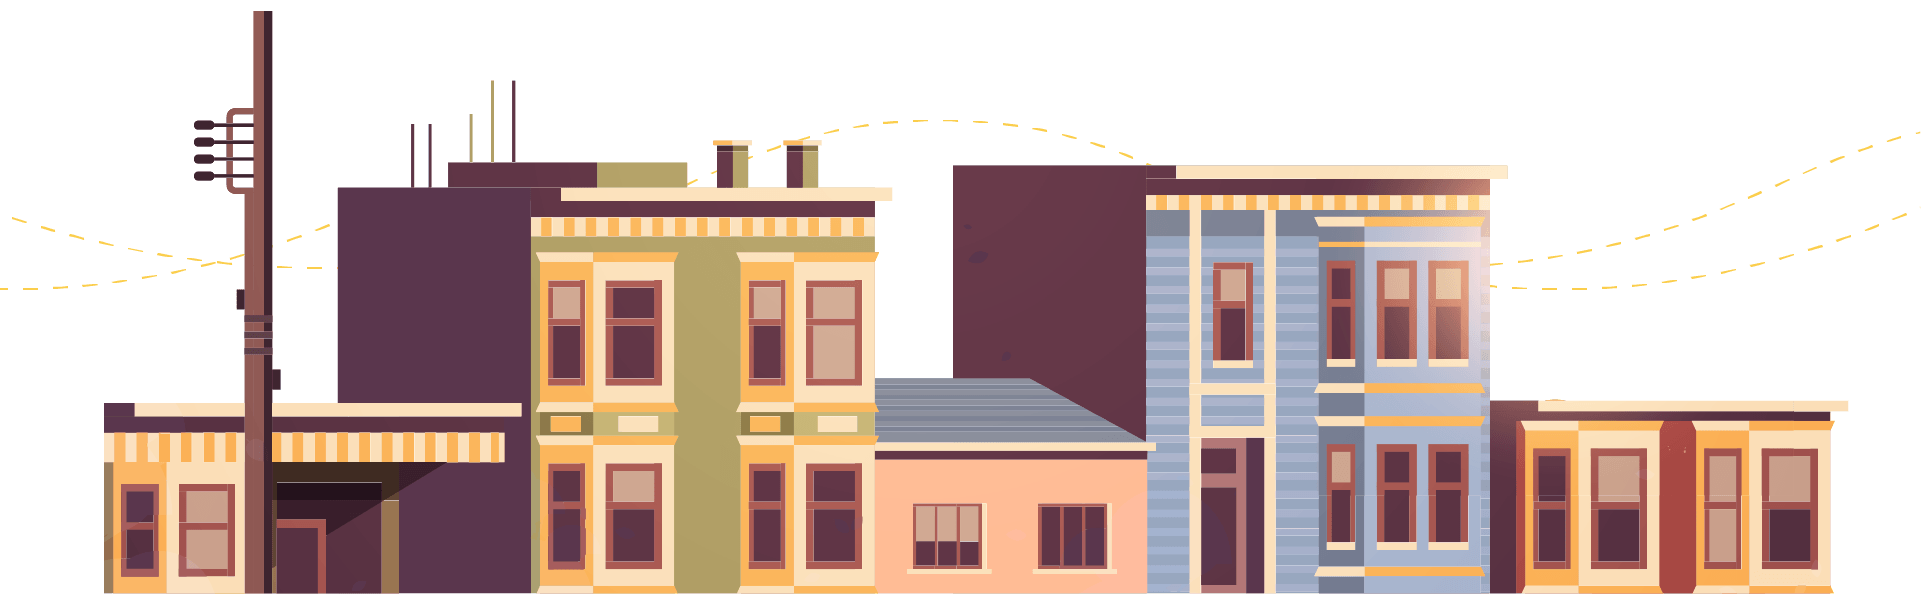 graphic of a street of buildings and houses